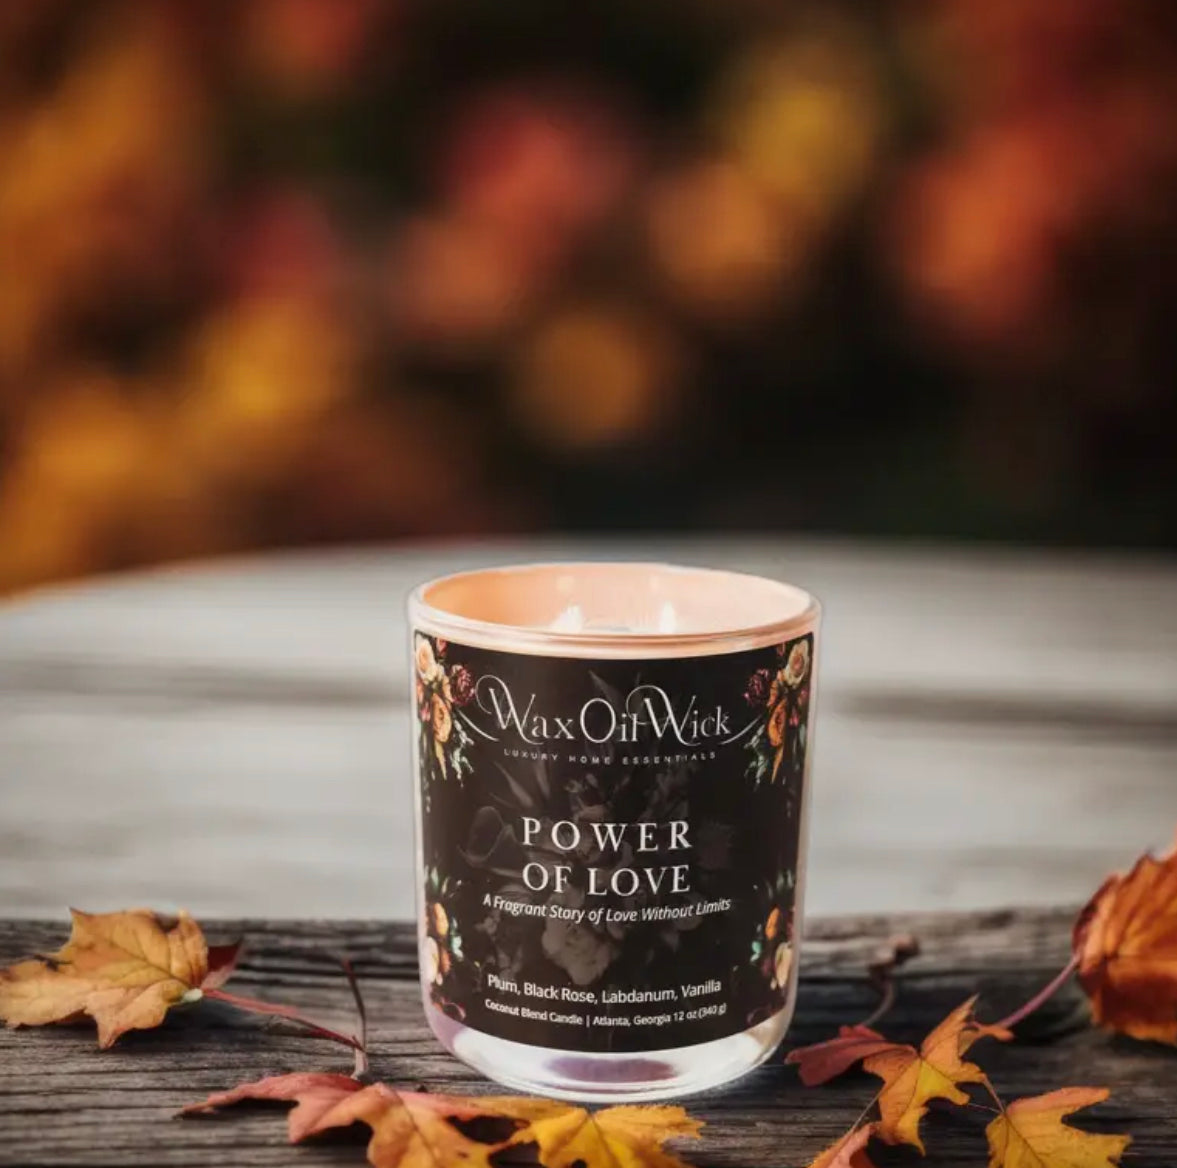 Power of Love “Modern Romantic Luxury”  Rose Vanilla Amber Scented Candle